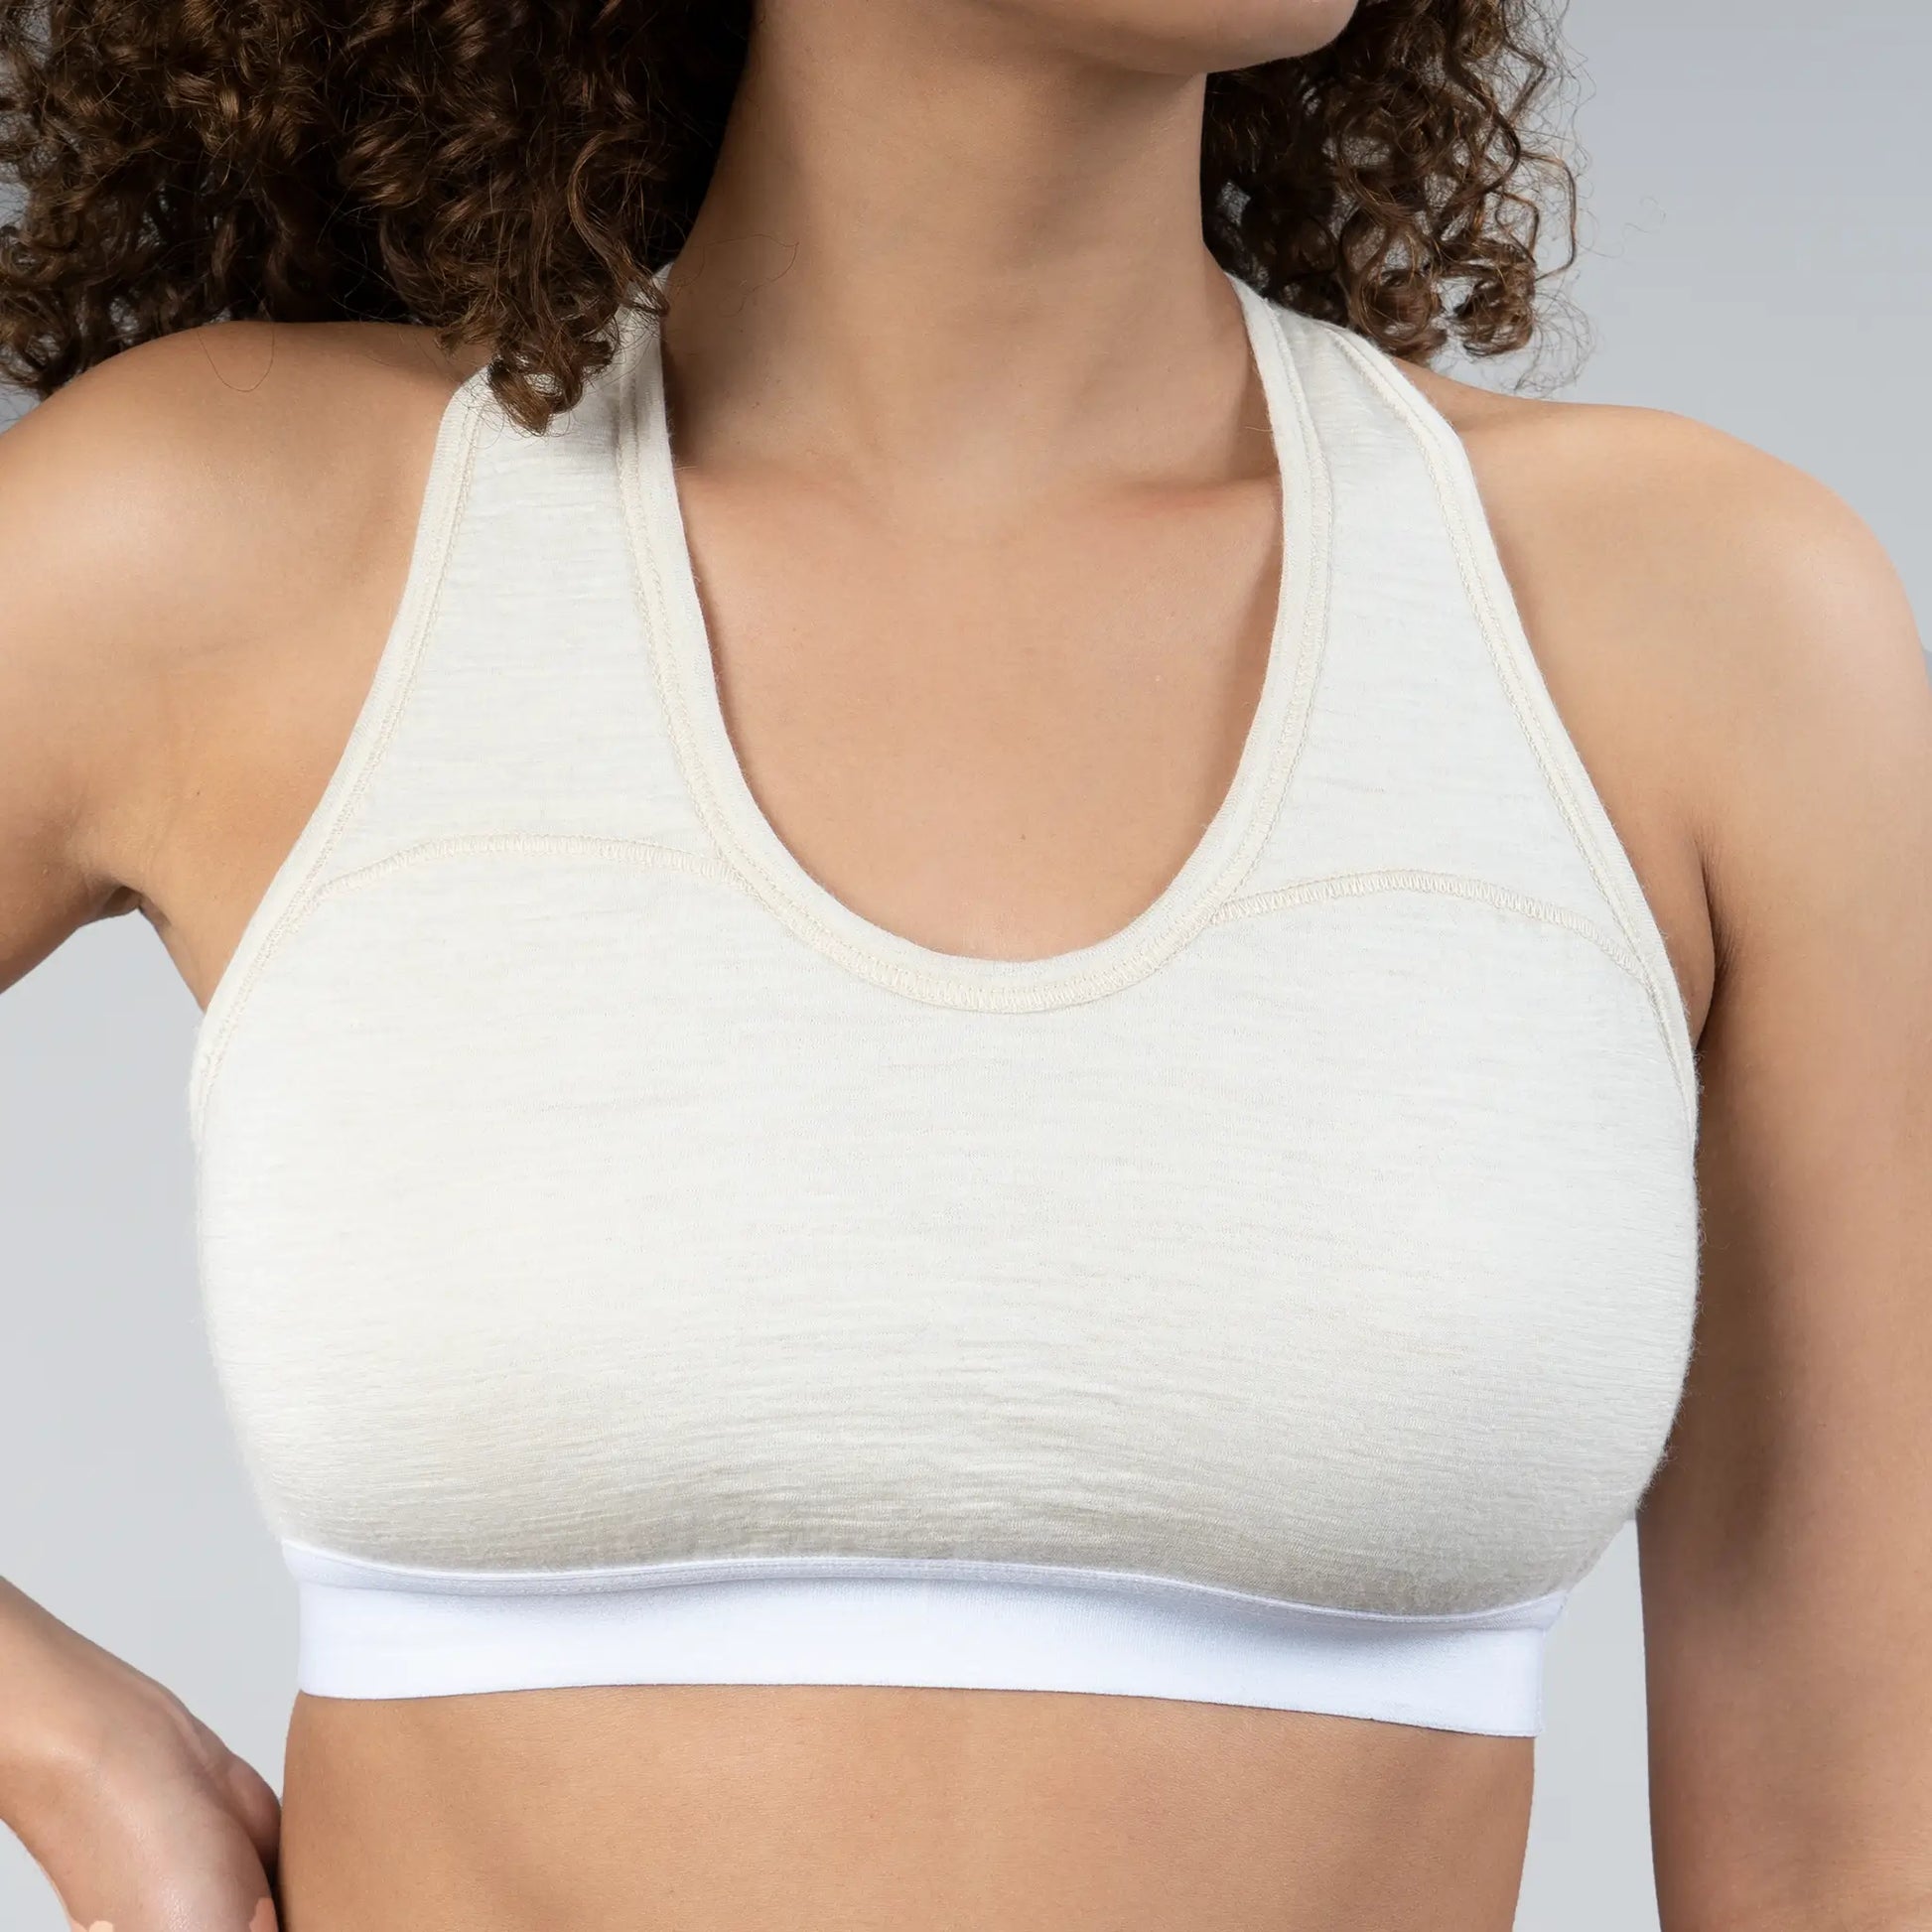  womens ultimate outdoor sports bra ultralight color natural white